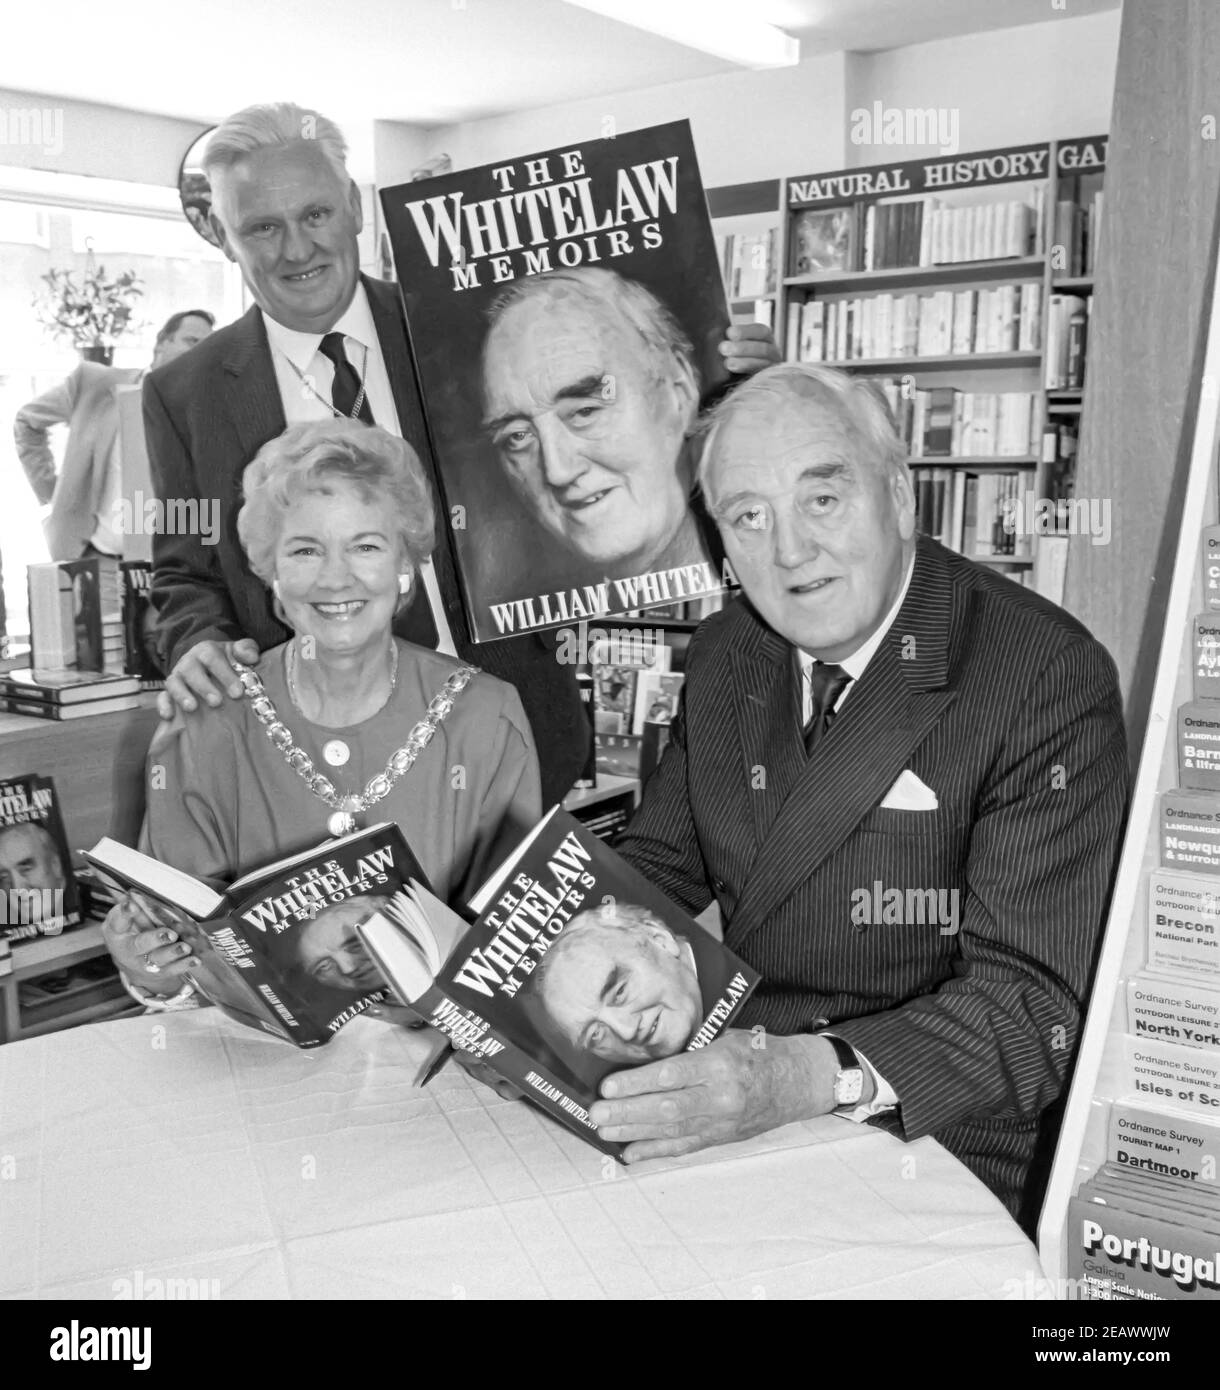 HEMEL HEMPSTEAD - ENGLAND. Willie Whitelaw at his book launch ’The Whitelaw Memories’ at WH Smiths with the local mayor Betty Lees in Hemel Hempstead, Stock Photo